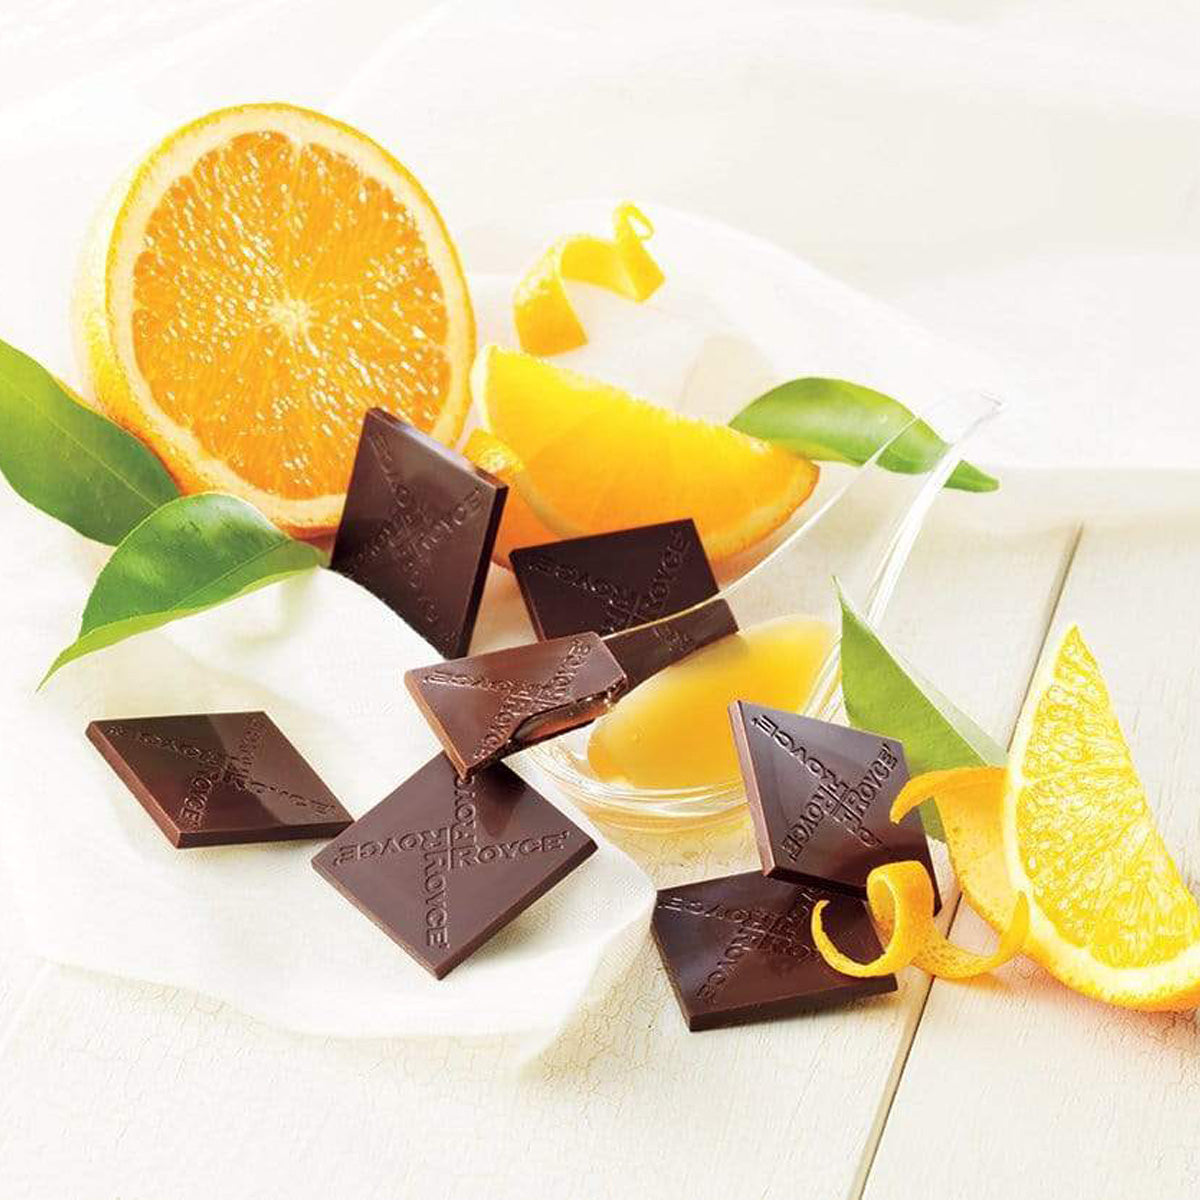 ROYCE' Chocolate - Prafeuille Chocolat "Orange" - Image shows brown chocolate squares filled with orange sauce and with the words "ROYCE'" engraved, as placed on a wooden surface in white. Accents include fruit slices of orange and orange skin peel, green leaves, a clear plastic spoon with orange sauce, and a white tablecloth. Background is in color white.